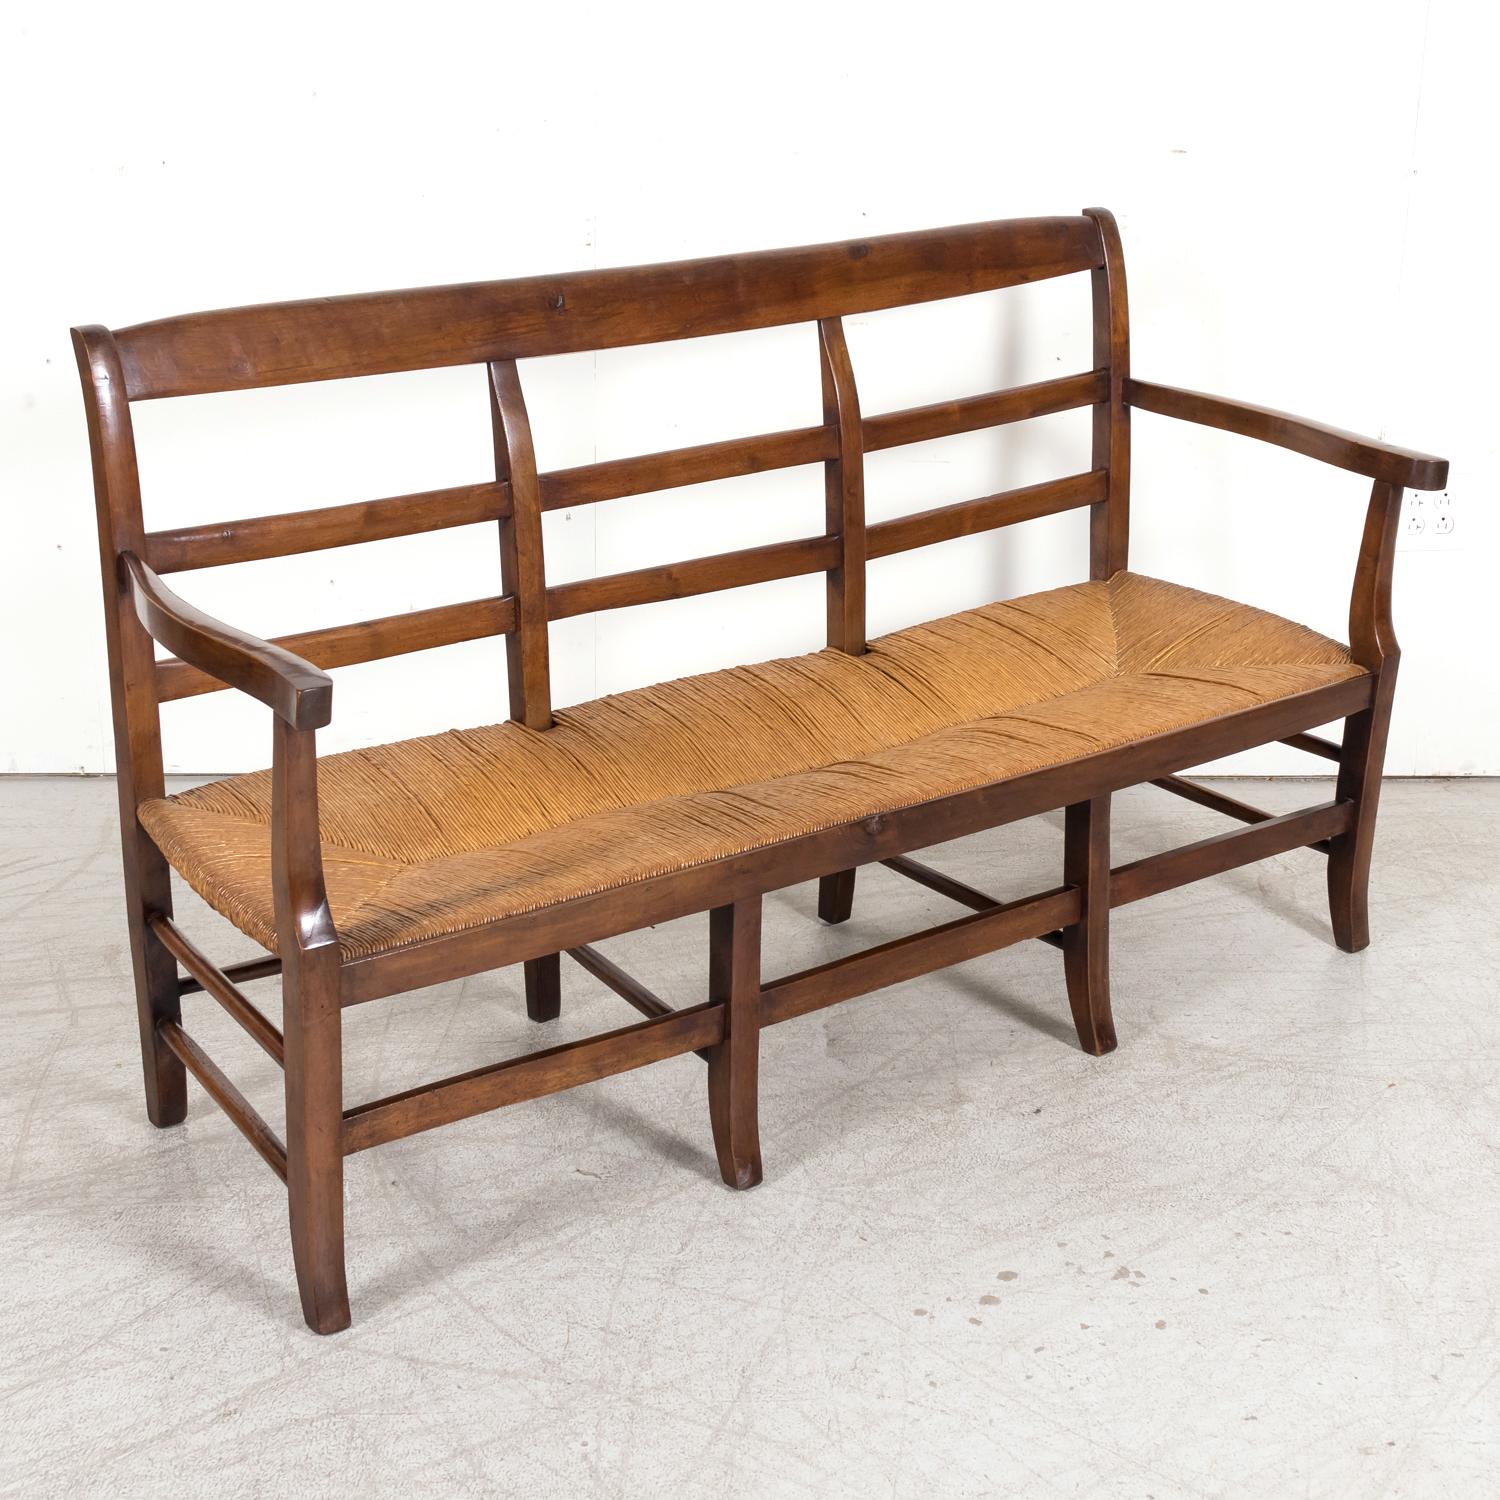 A mid-19th century French radassier or bench handcrafted of solid walnut with a rush seat in Provence, near Avignon, circa 1850s. This double arm Provençal bench seats three and features a ladder-back. A simple yet refined look that captures the